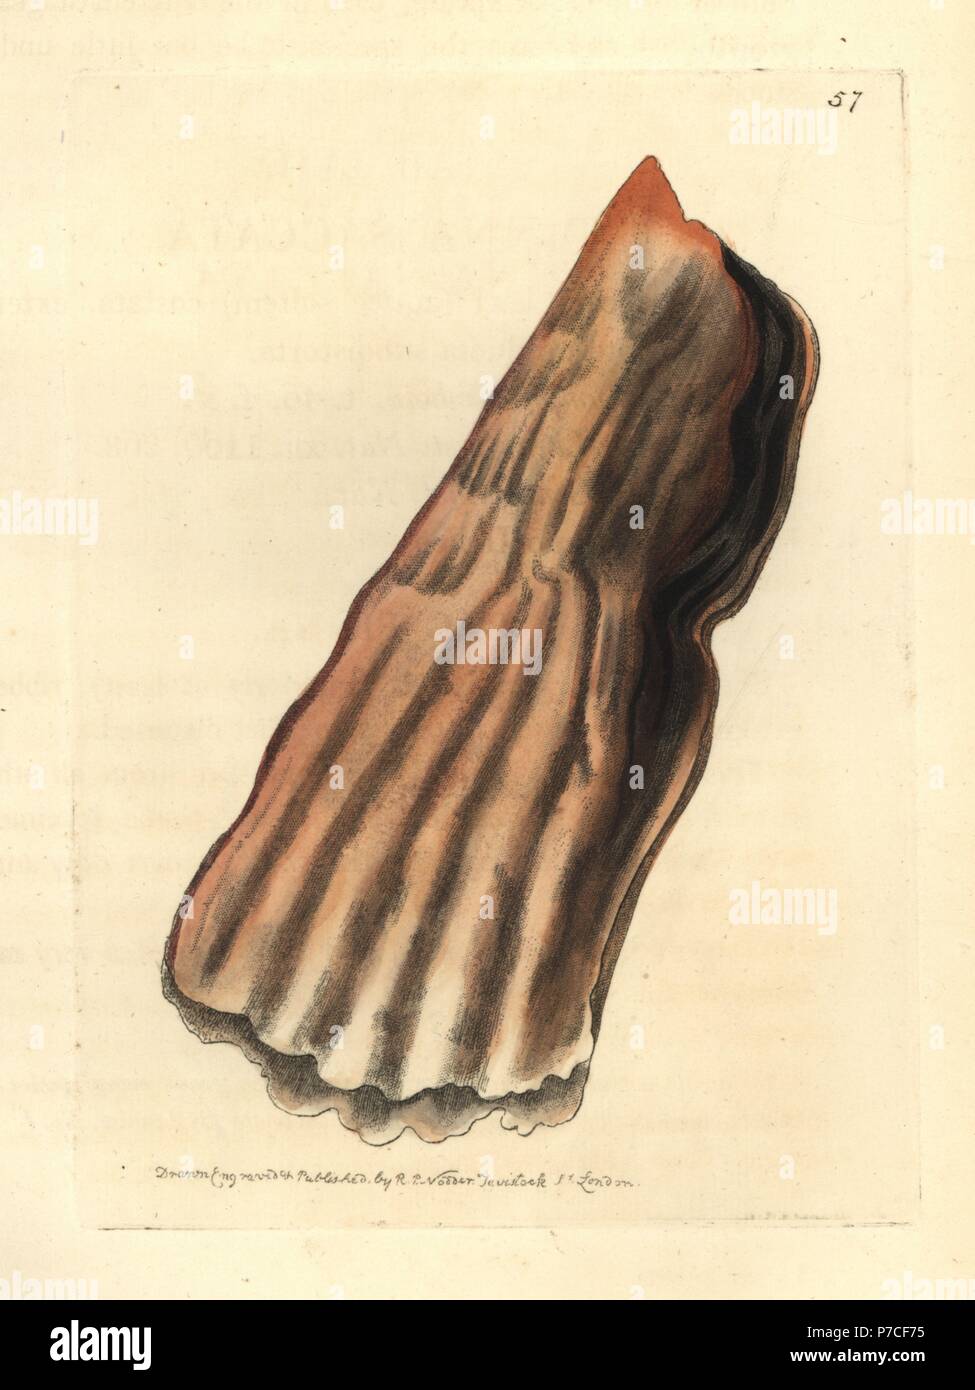 Baggy pen shell or bag pinna, Pinna saccata. Handcoloured copperplate engraving drawn and engraved by Richard Polydore Nodder from William Elford Leach's Zoological Miscellany, McMillan, London, 1815. Stock Photo